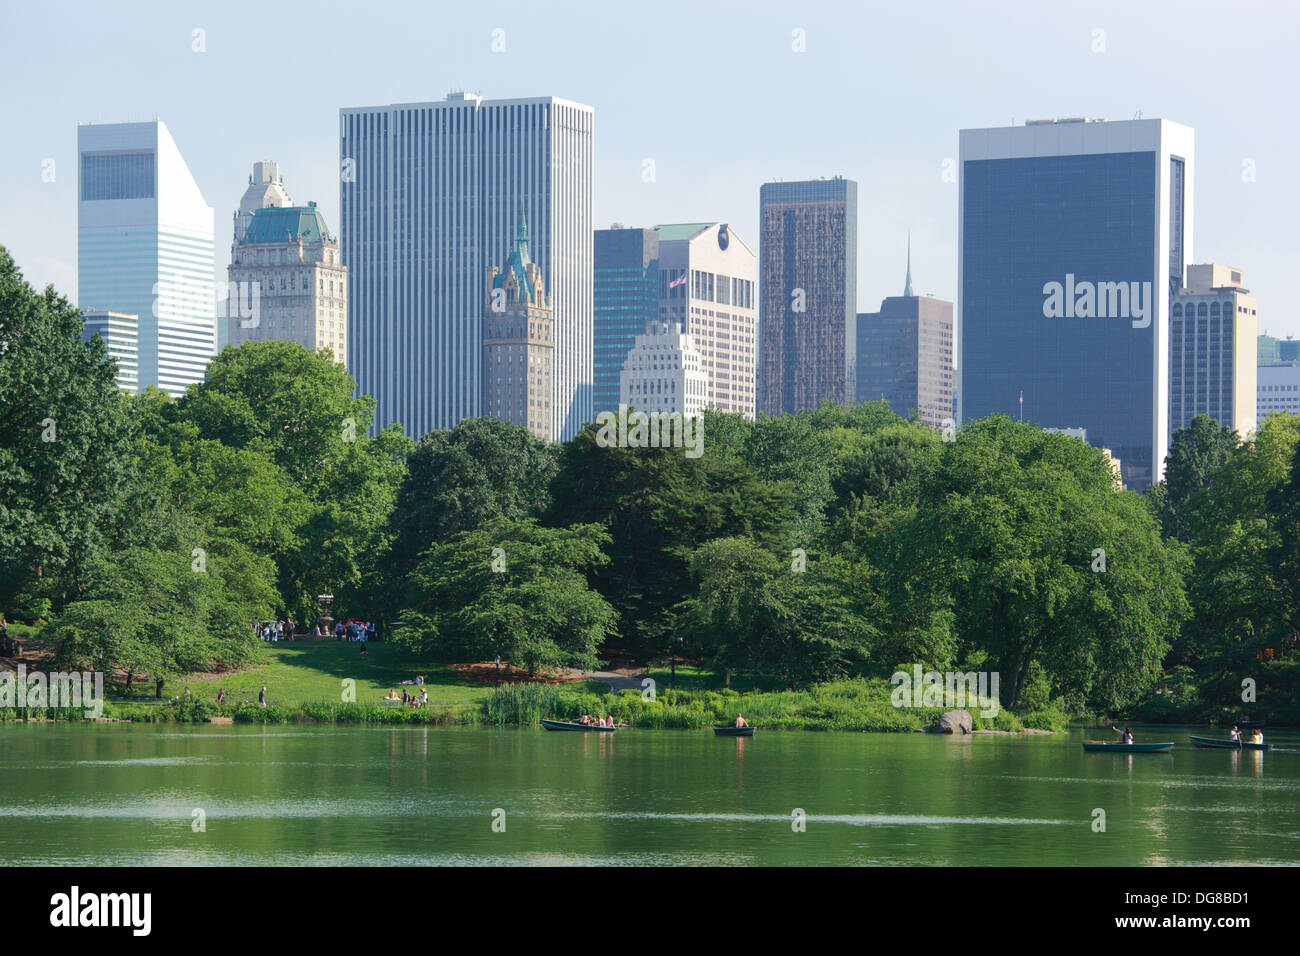 The Lake in Central Park, New York, USA. Stock Photo